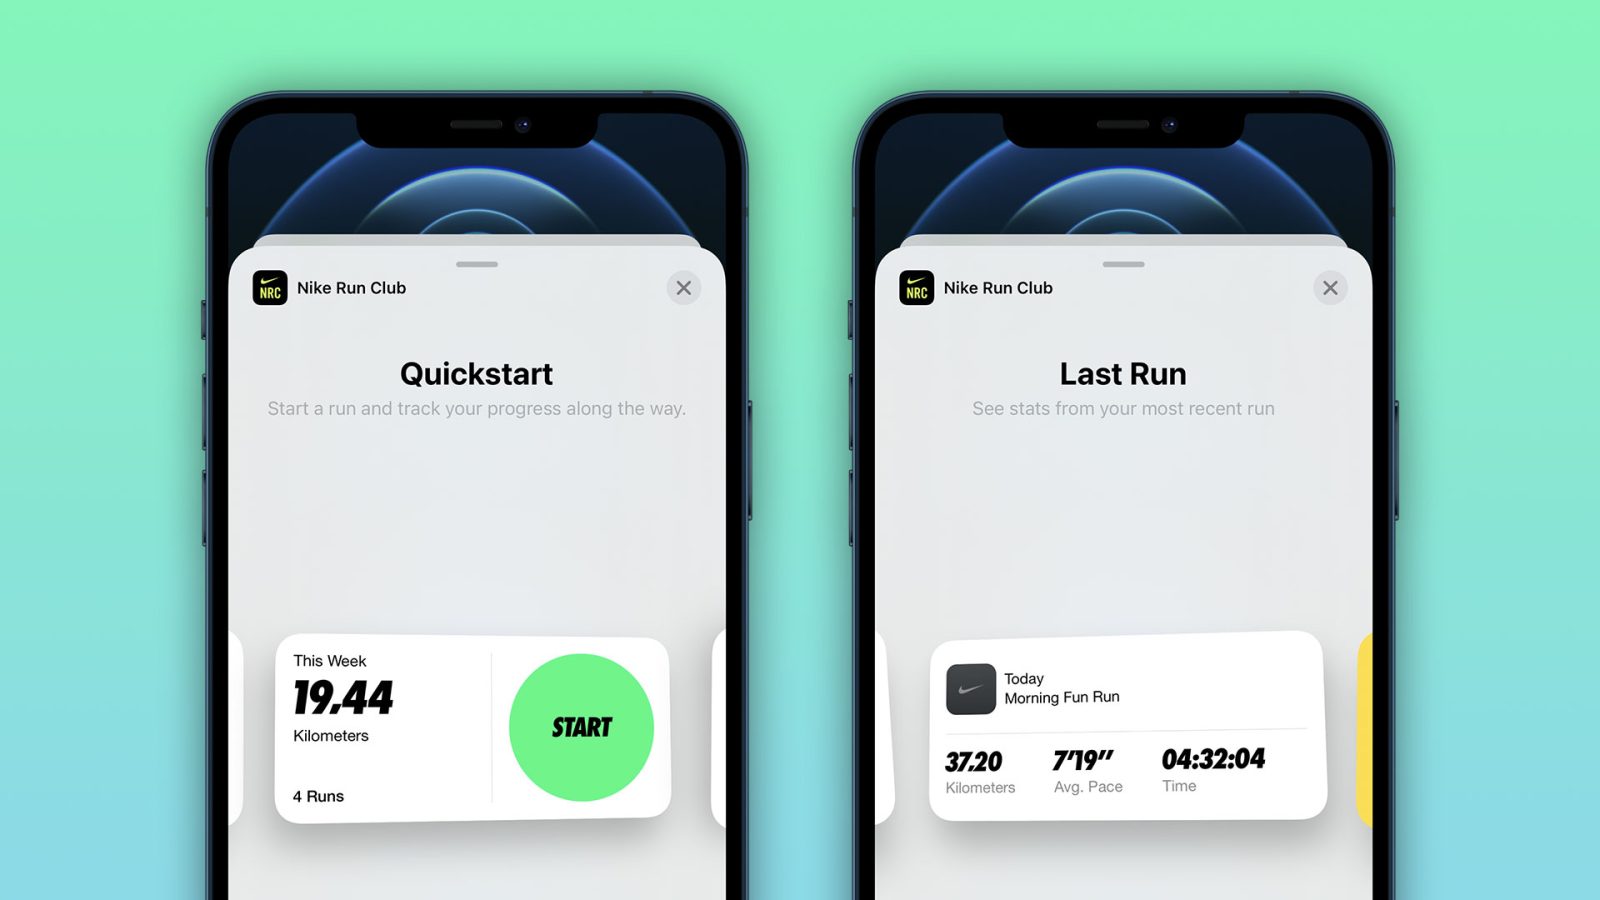 bulto Similar Extracción Nike Run Club updated with home screen widgets for iOS 14 - 9to5Mac